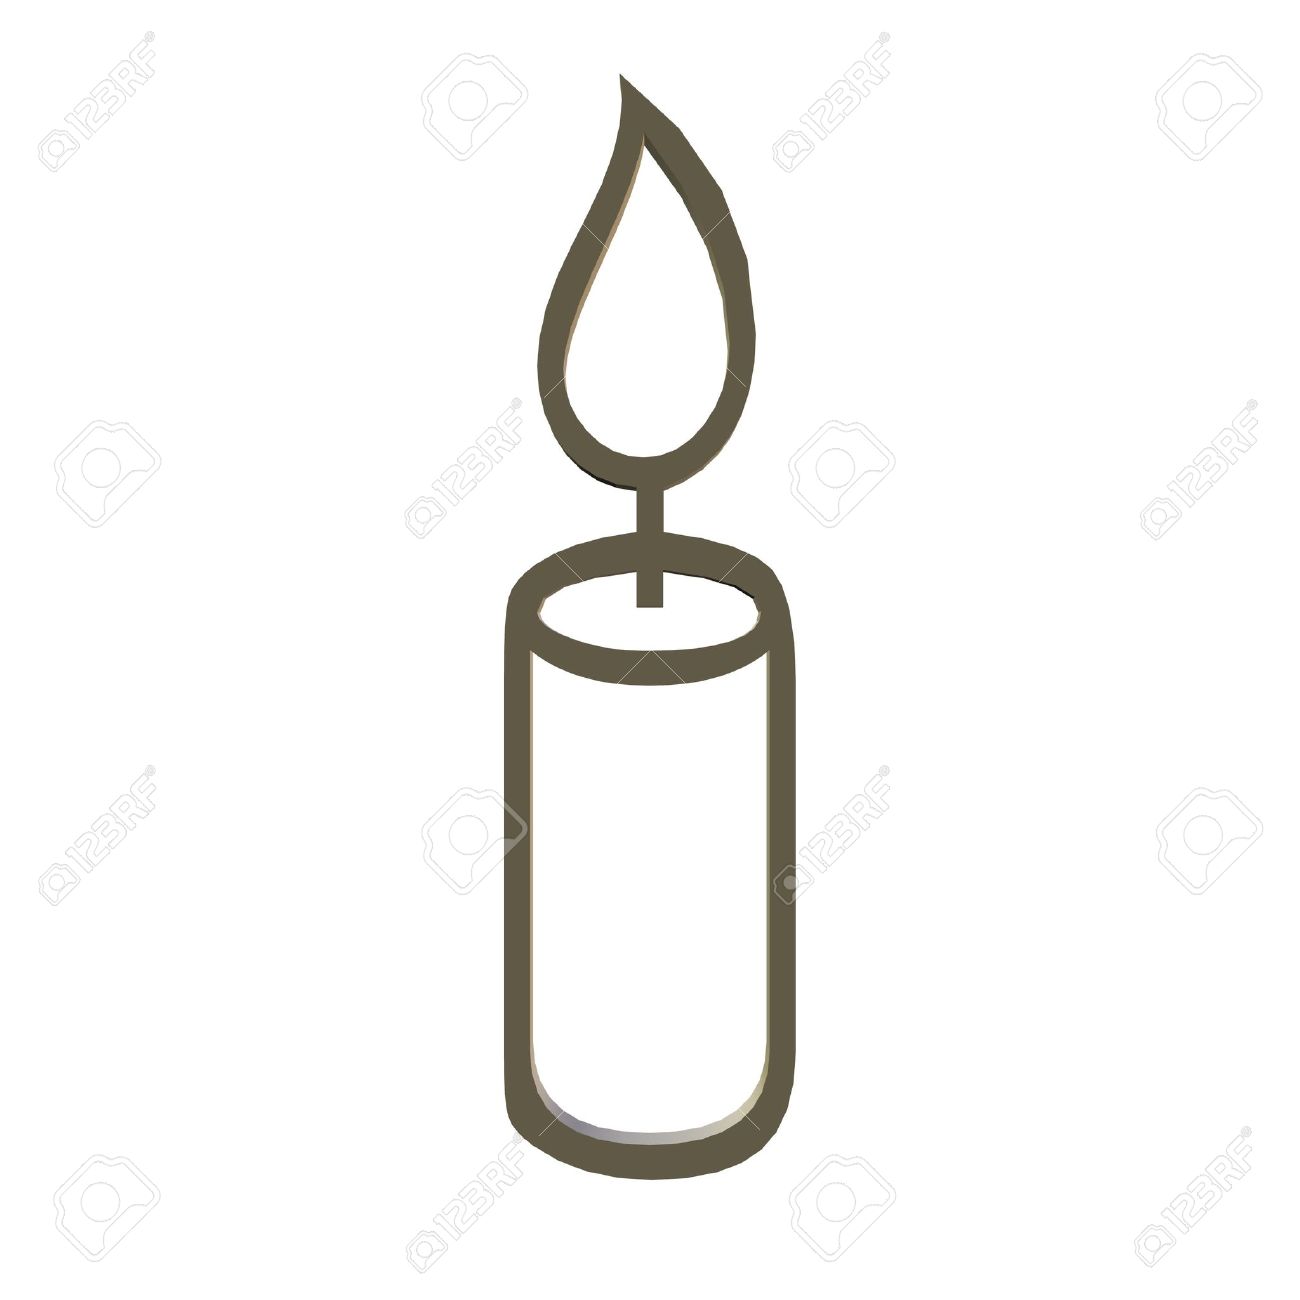 clipart, candle, Stock Photo - 1789655